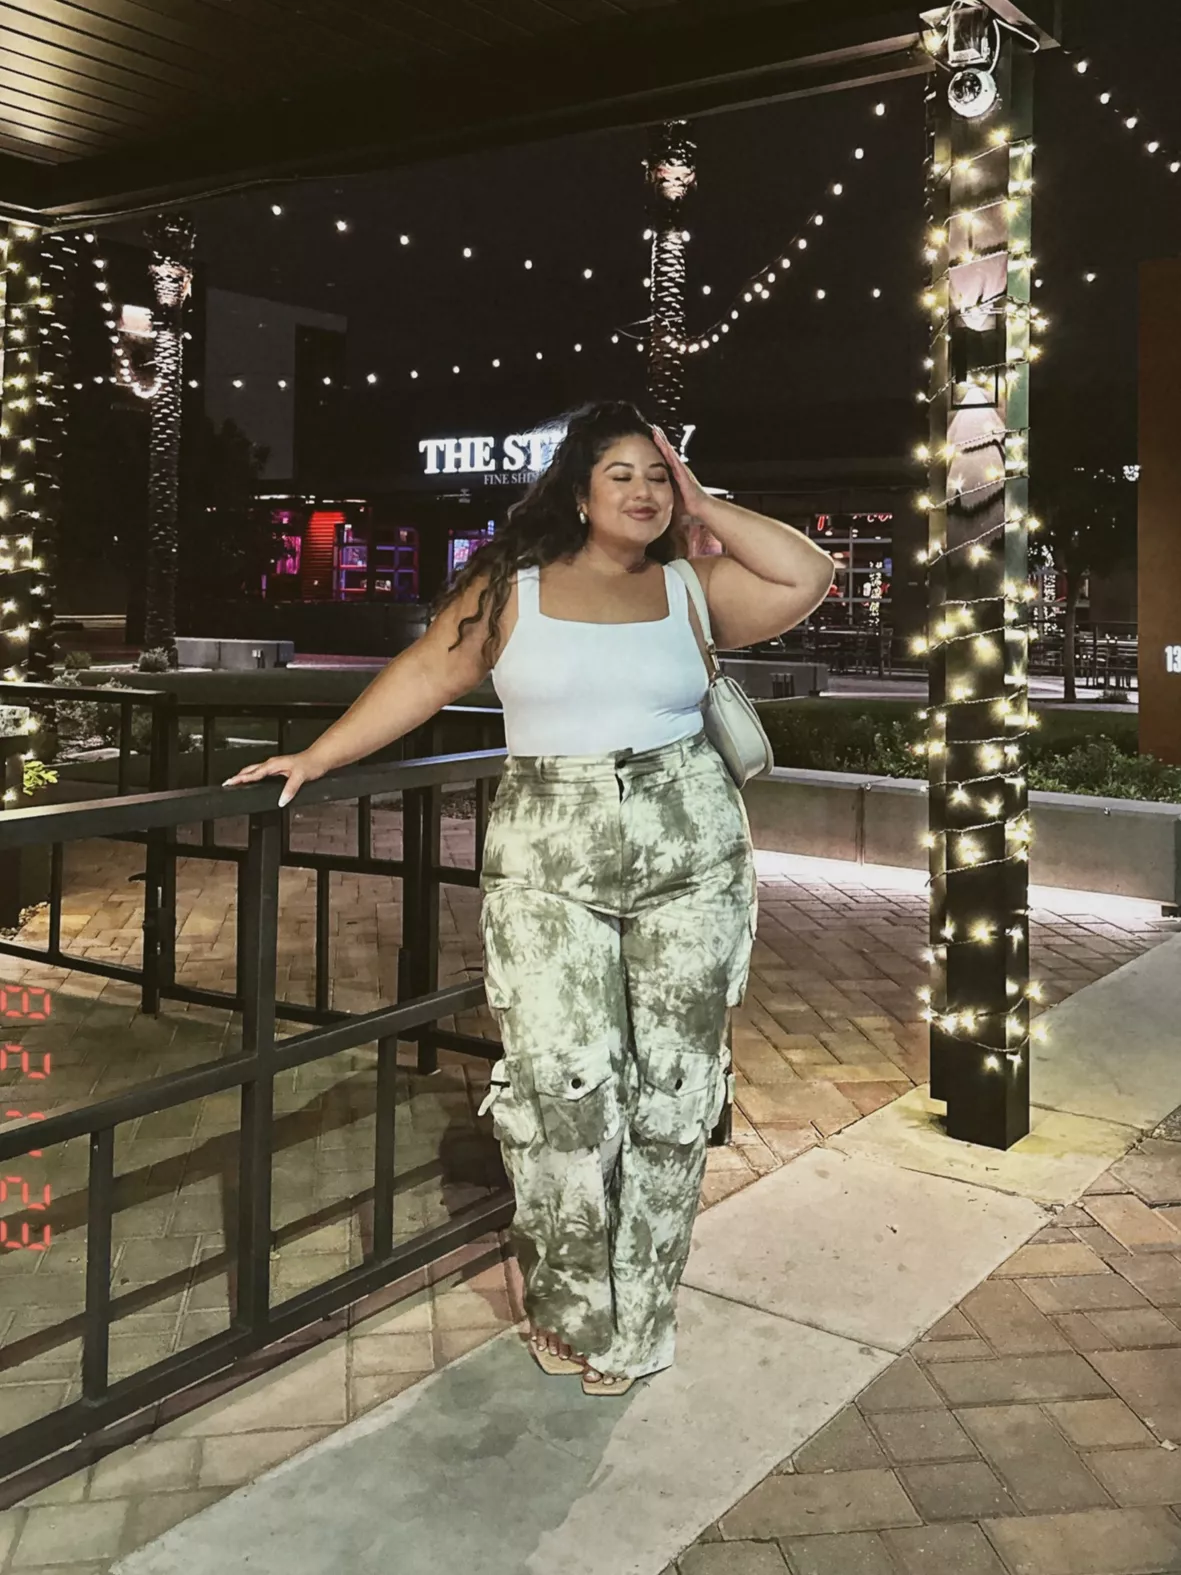 Cargo Trousers Plus Size Outfit Ideas